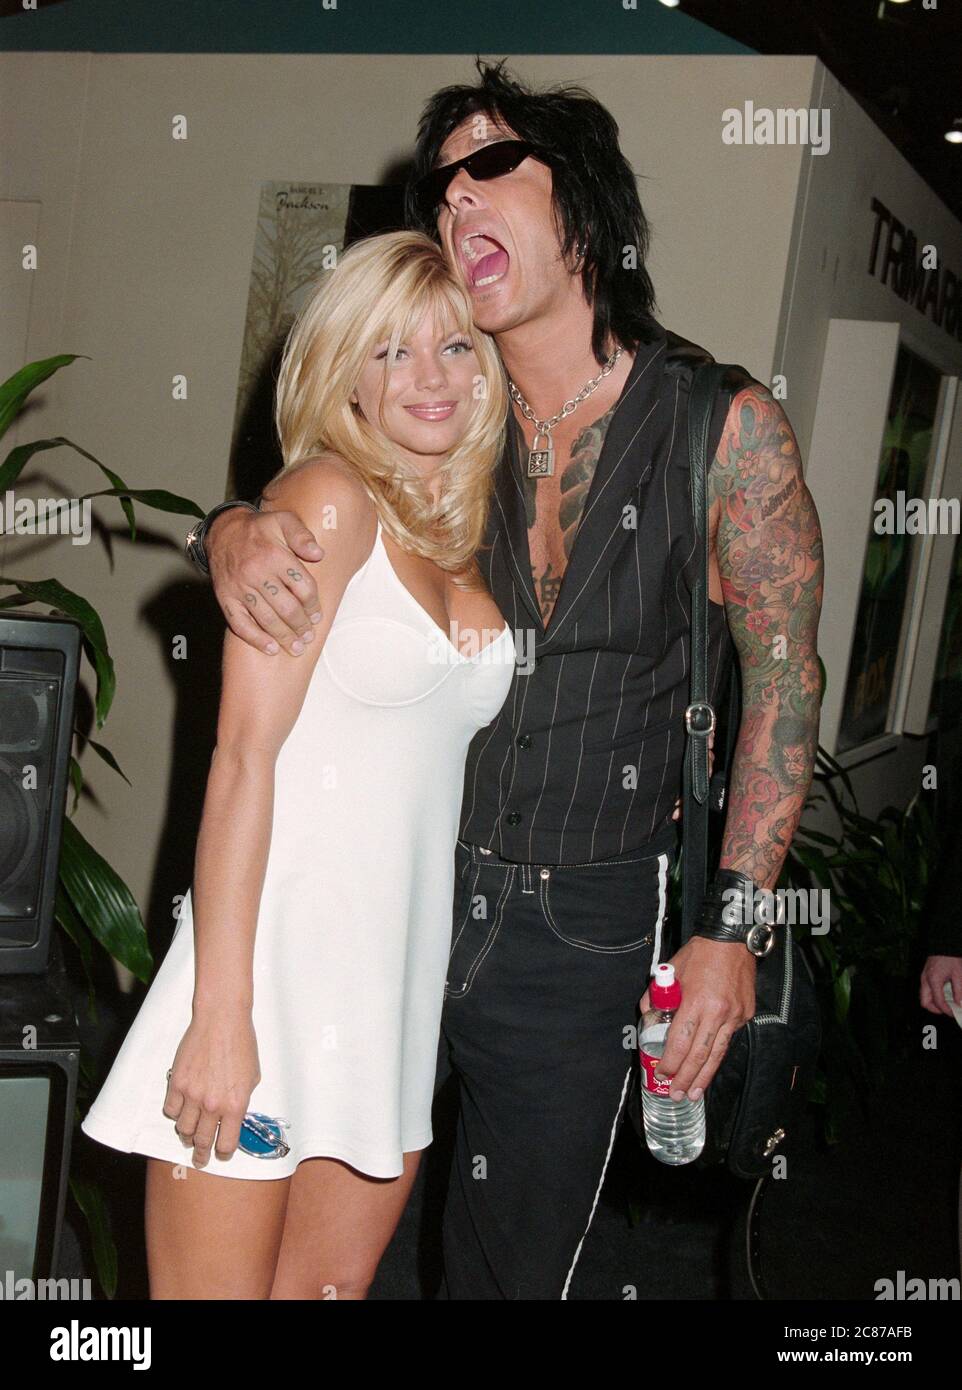 ARCHIVE: LAS VEGAS, NV. July 11, 1997: Baywatch star DONNA D'ERRICO & husband Motley Crue guitarist NICKI SIXX at the Video Software Dealers Assoc. convention in Las Vegas. File photo © Paul Smith/Featureflash Stock Photo